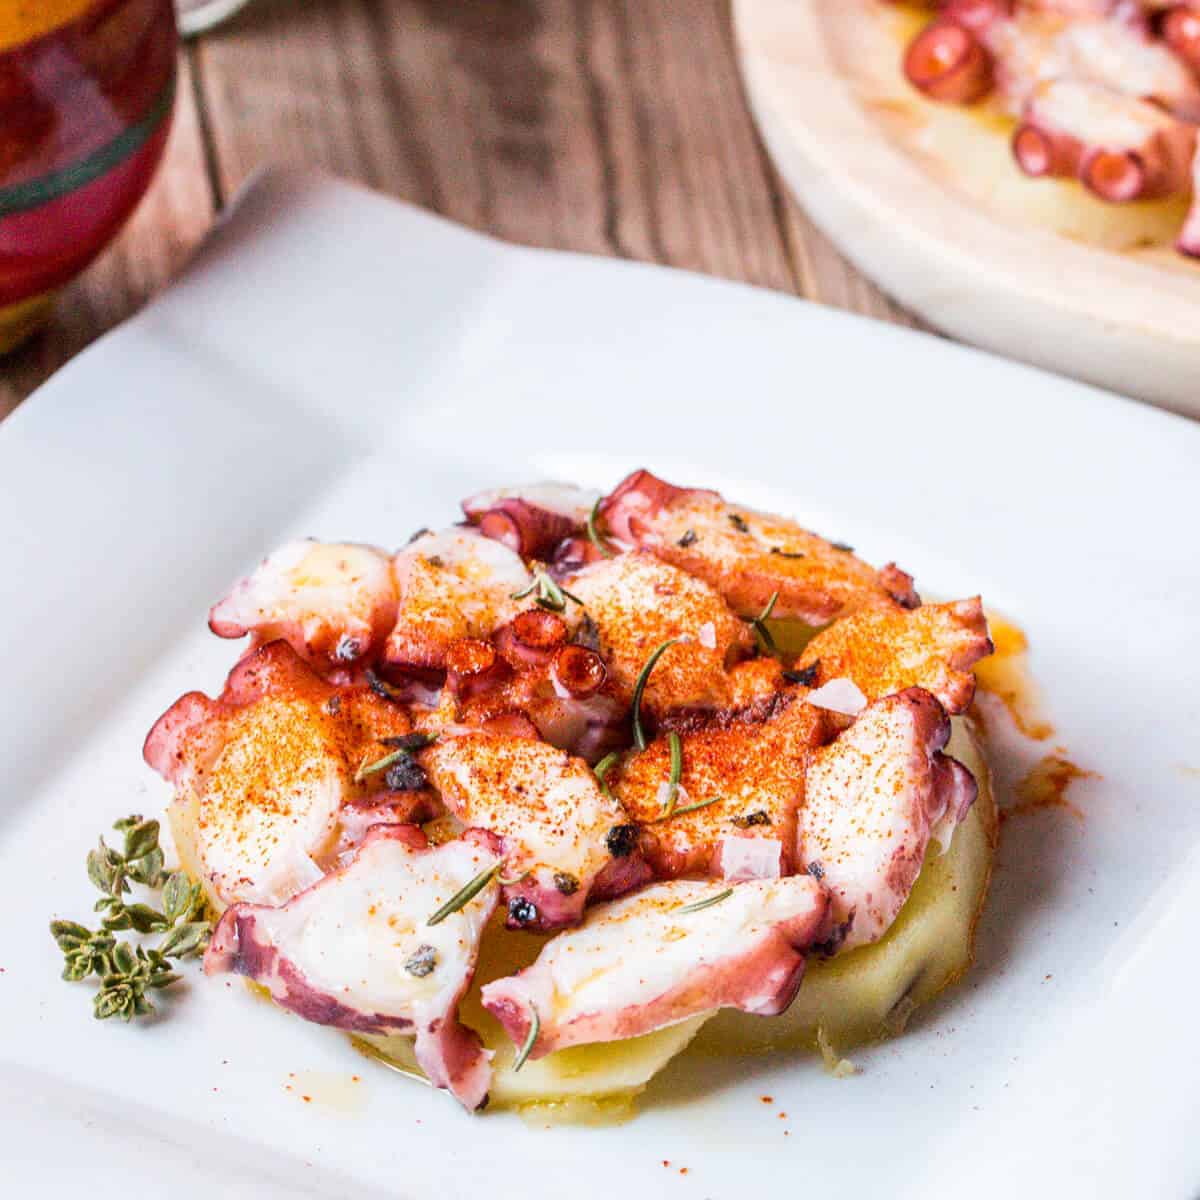 Pulpo a la Gallega (Galician Style Octopus) - Oh, The Things We'll Make!